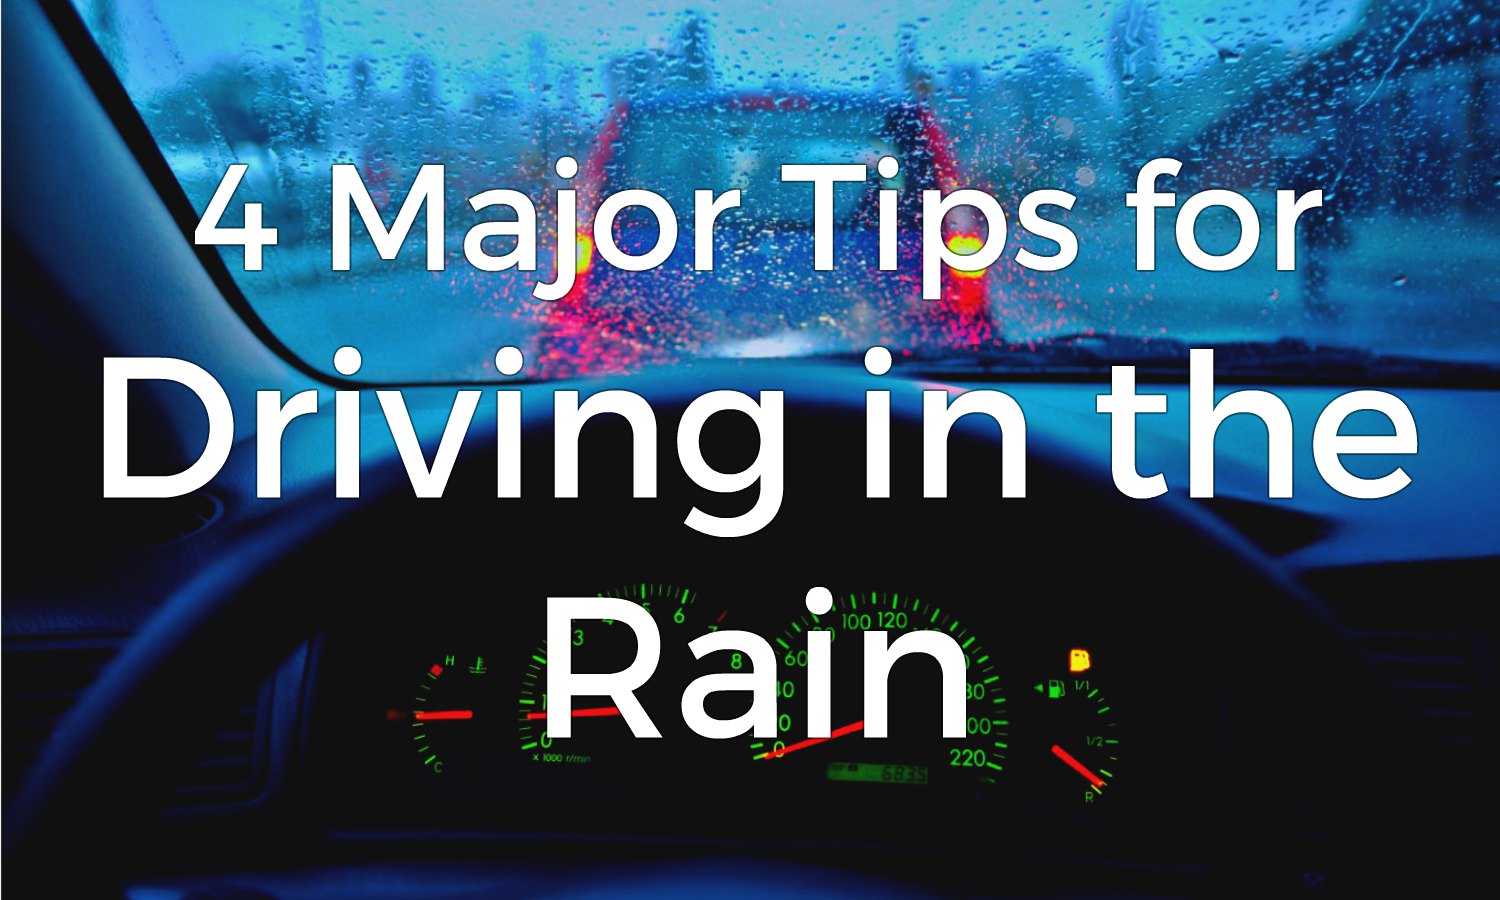 4 Major Tips for Driving in the Rain